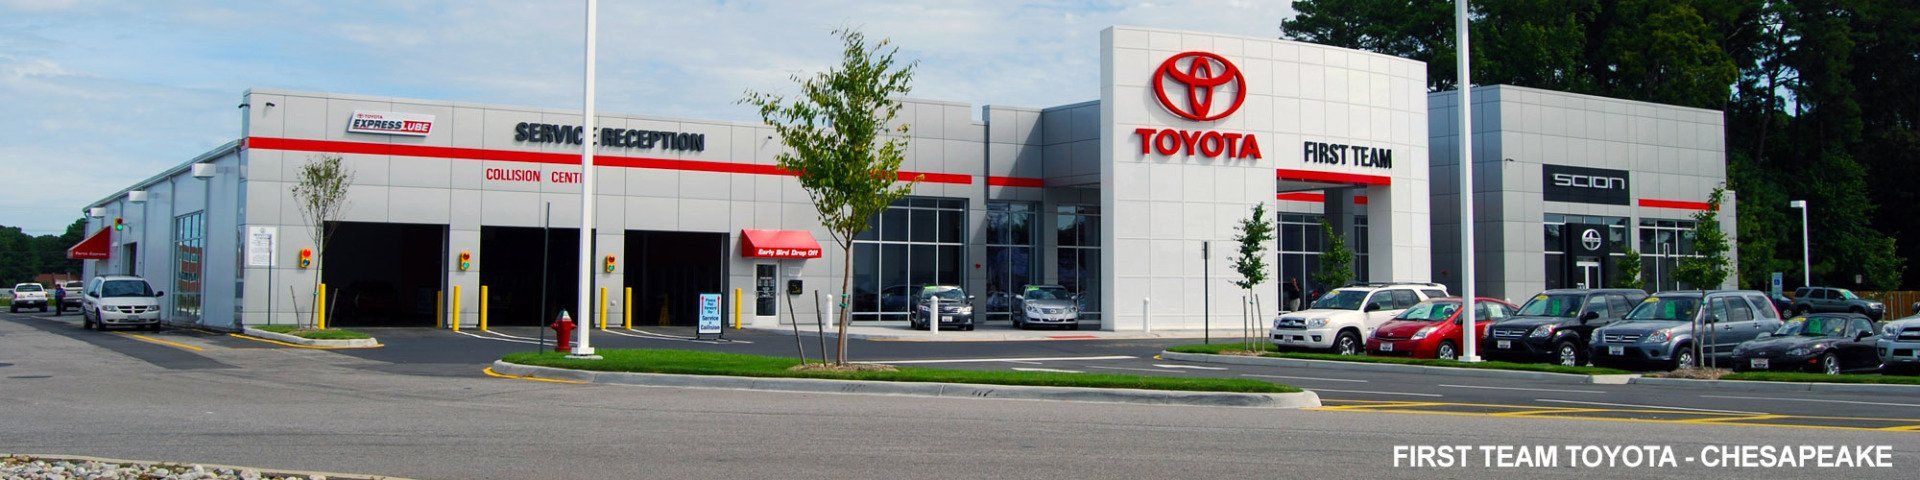 First Team Toyota Building